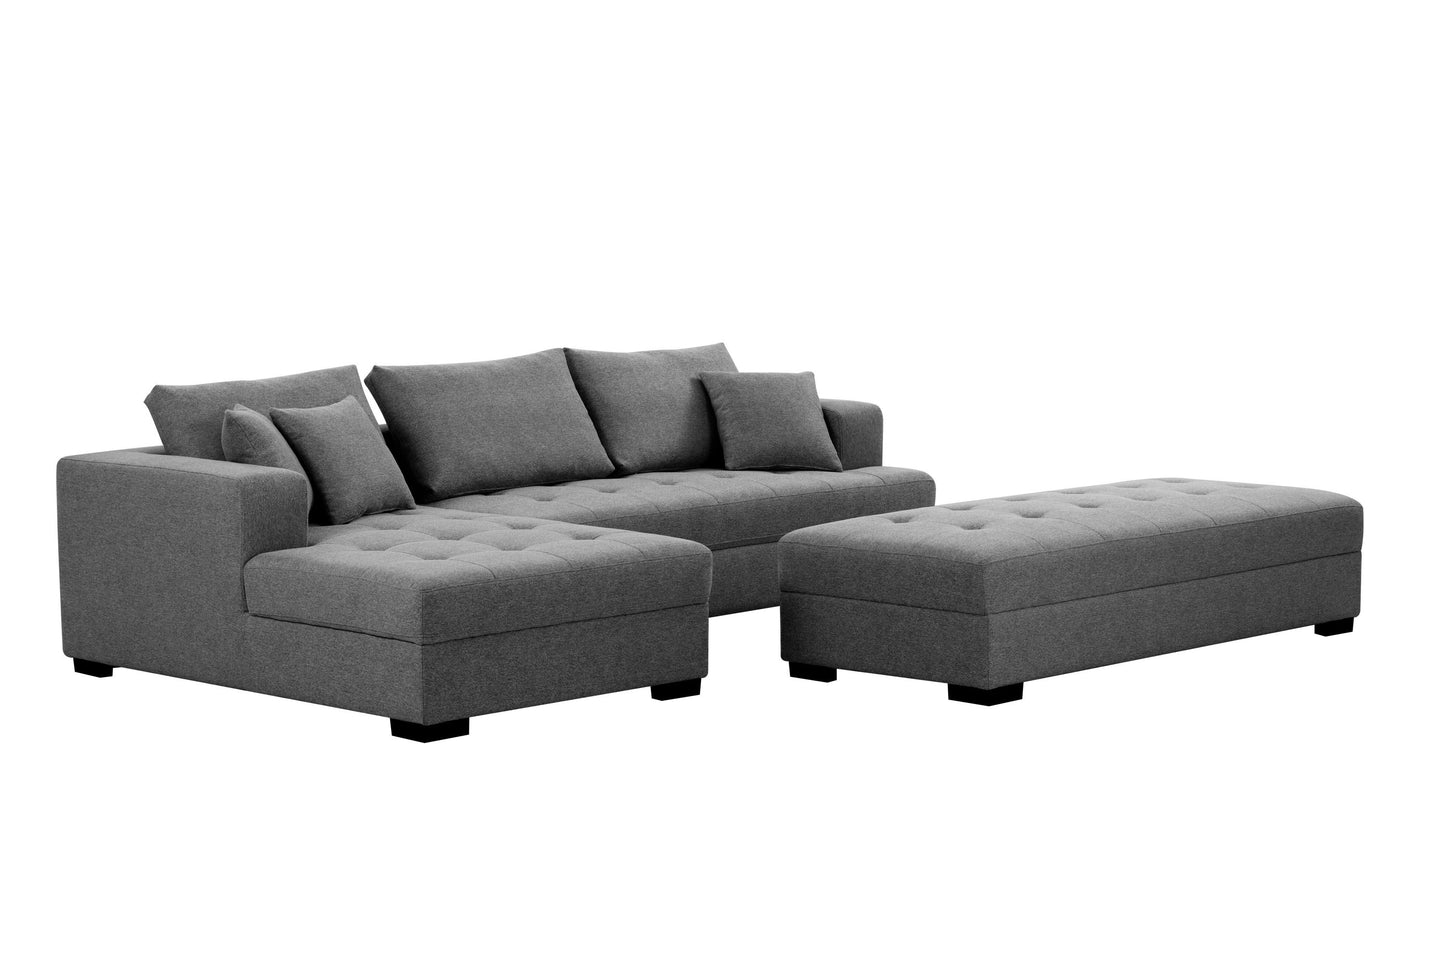 111" Tufted Fabric 3-Seat L-Shape Sectional Sofa Couch Set w/Chaise Lounge, Ottoman Coffee Table Bench, Dark Grey